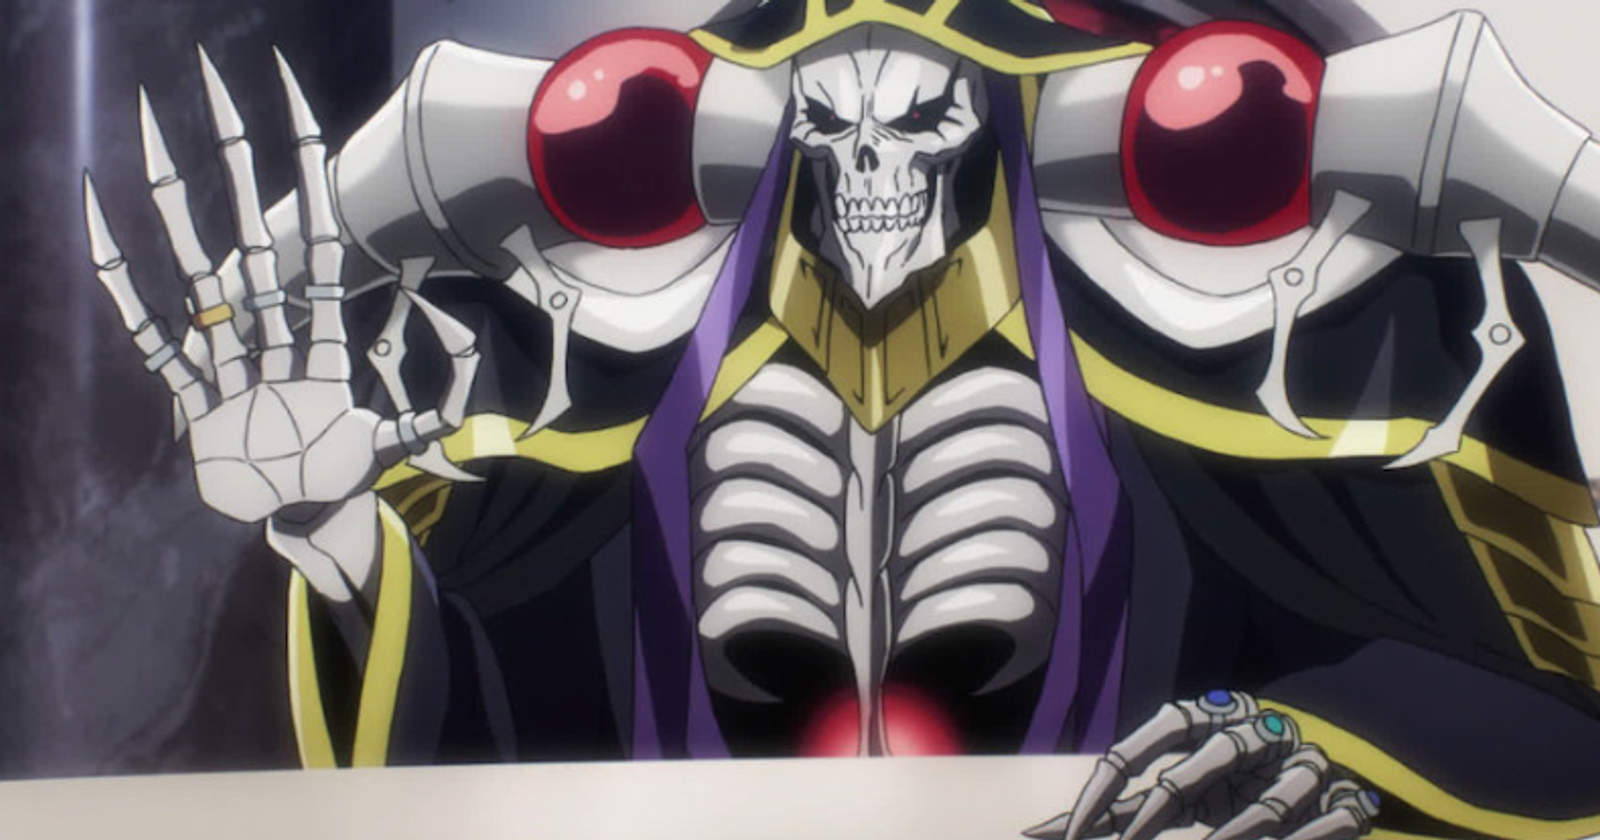 Overlord Anime to get a 4th Season and Feature Film - Siliconera